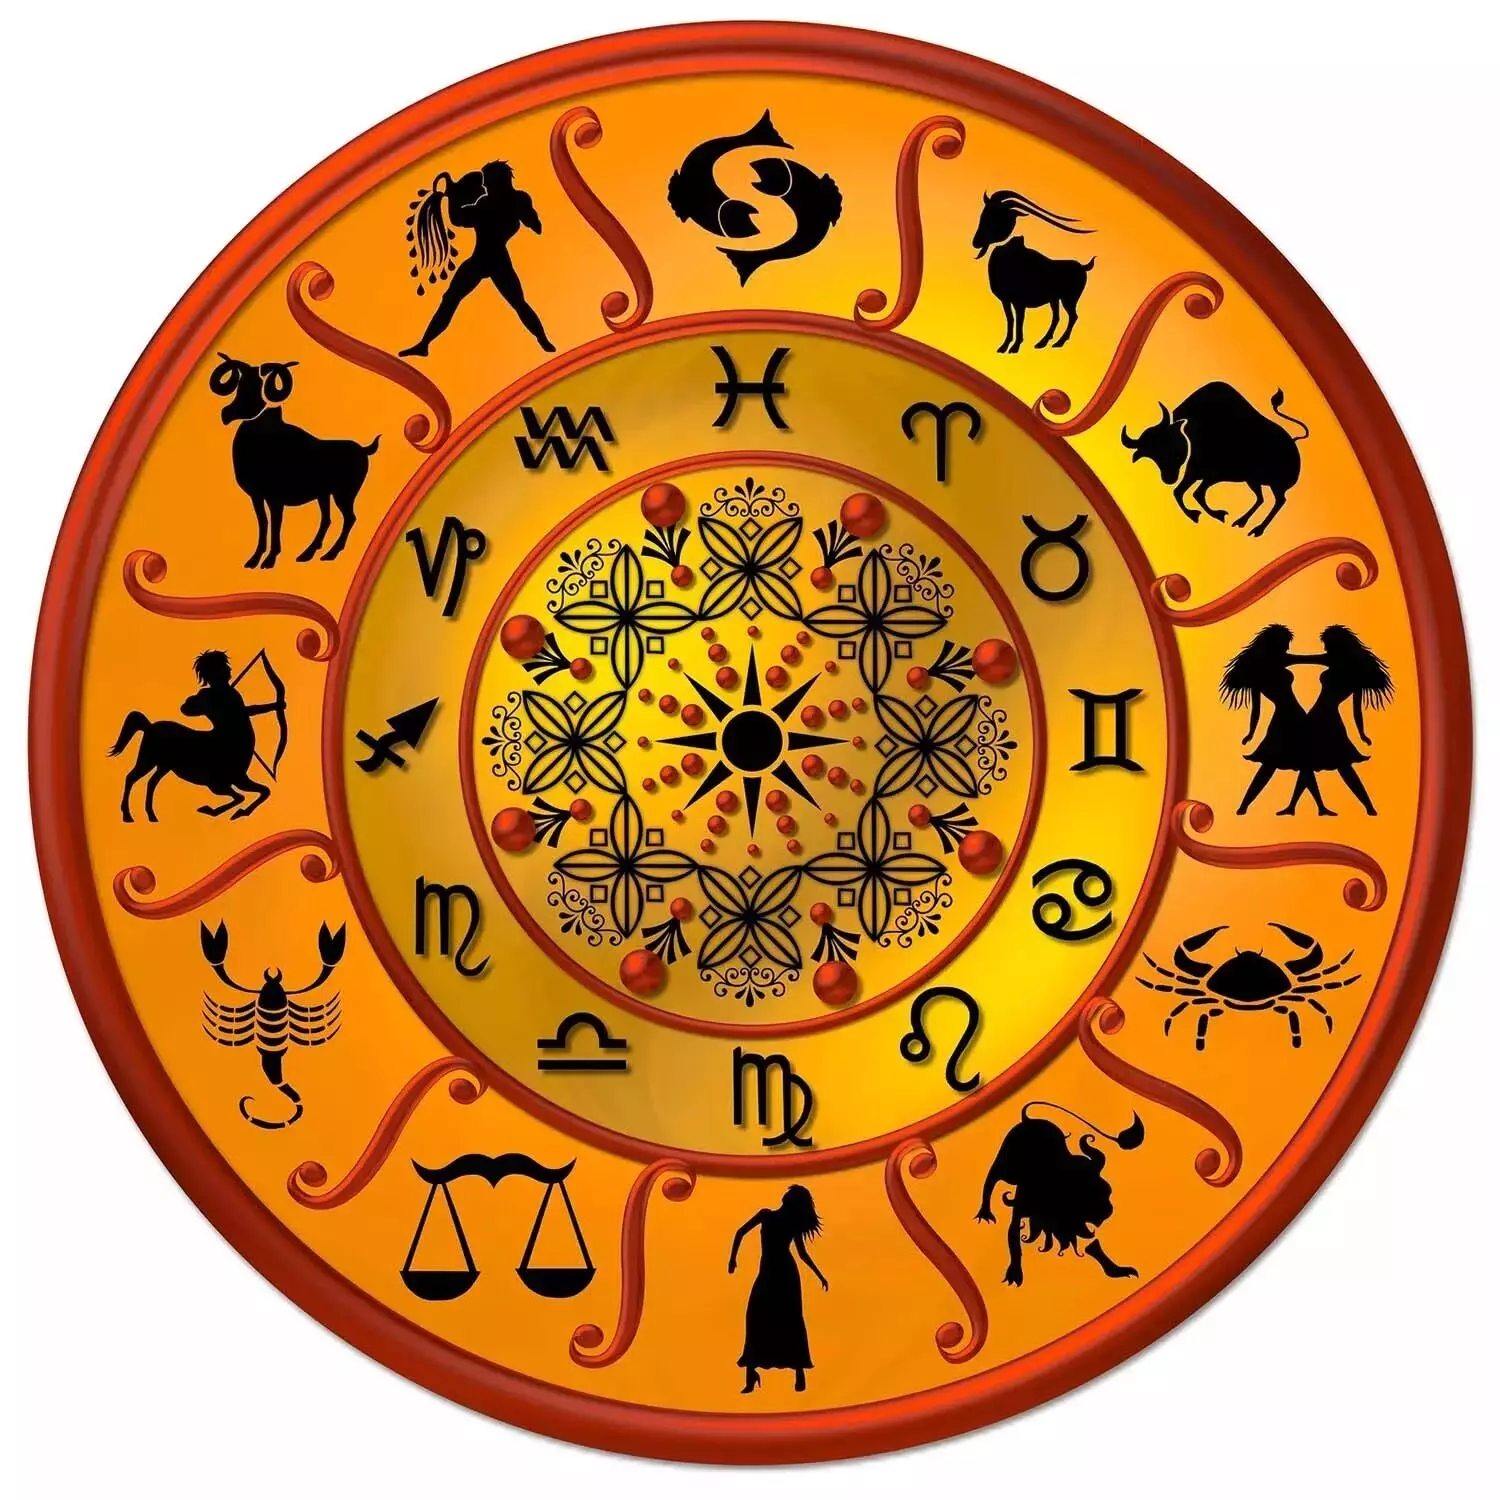 19 September  – Know your todays horoscope